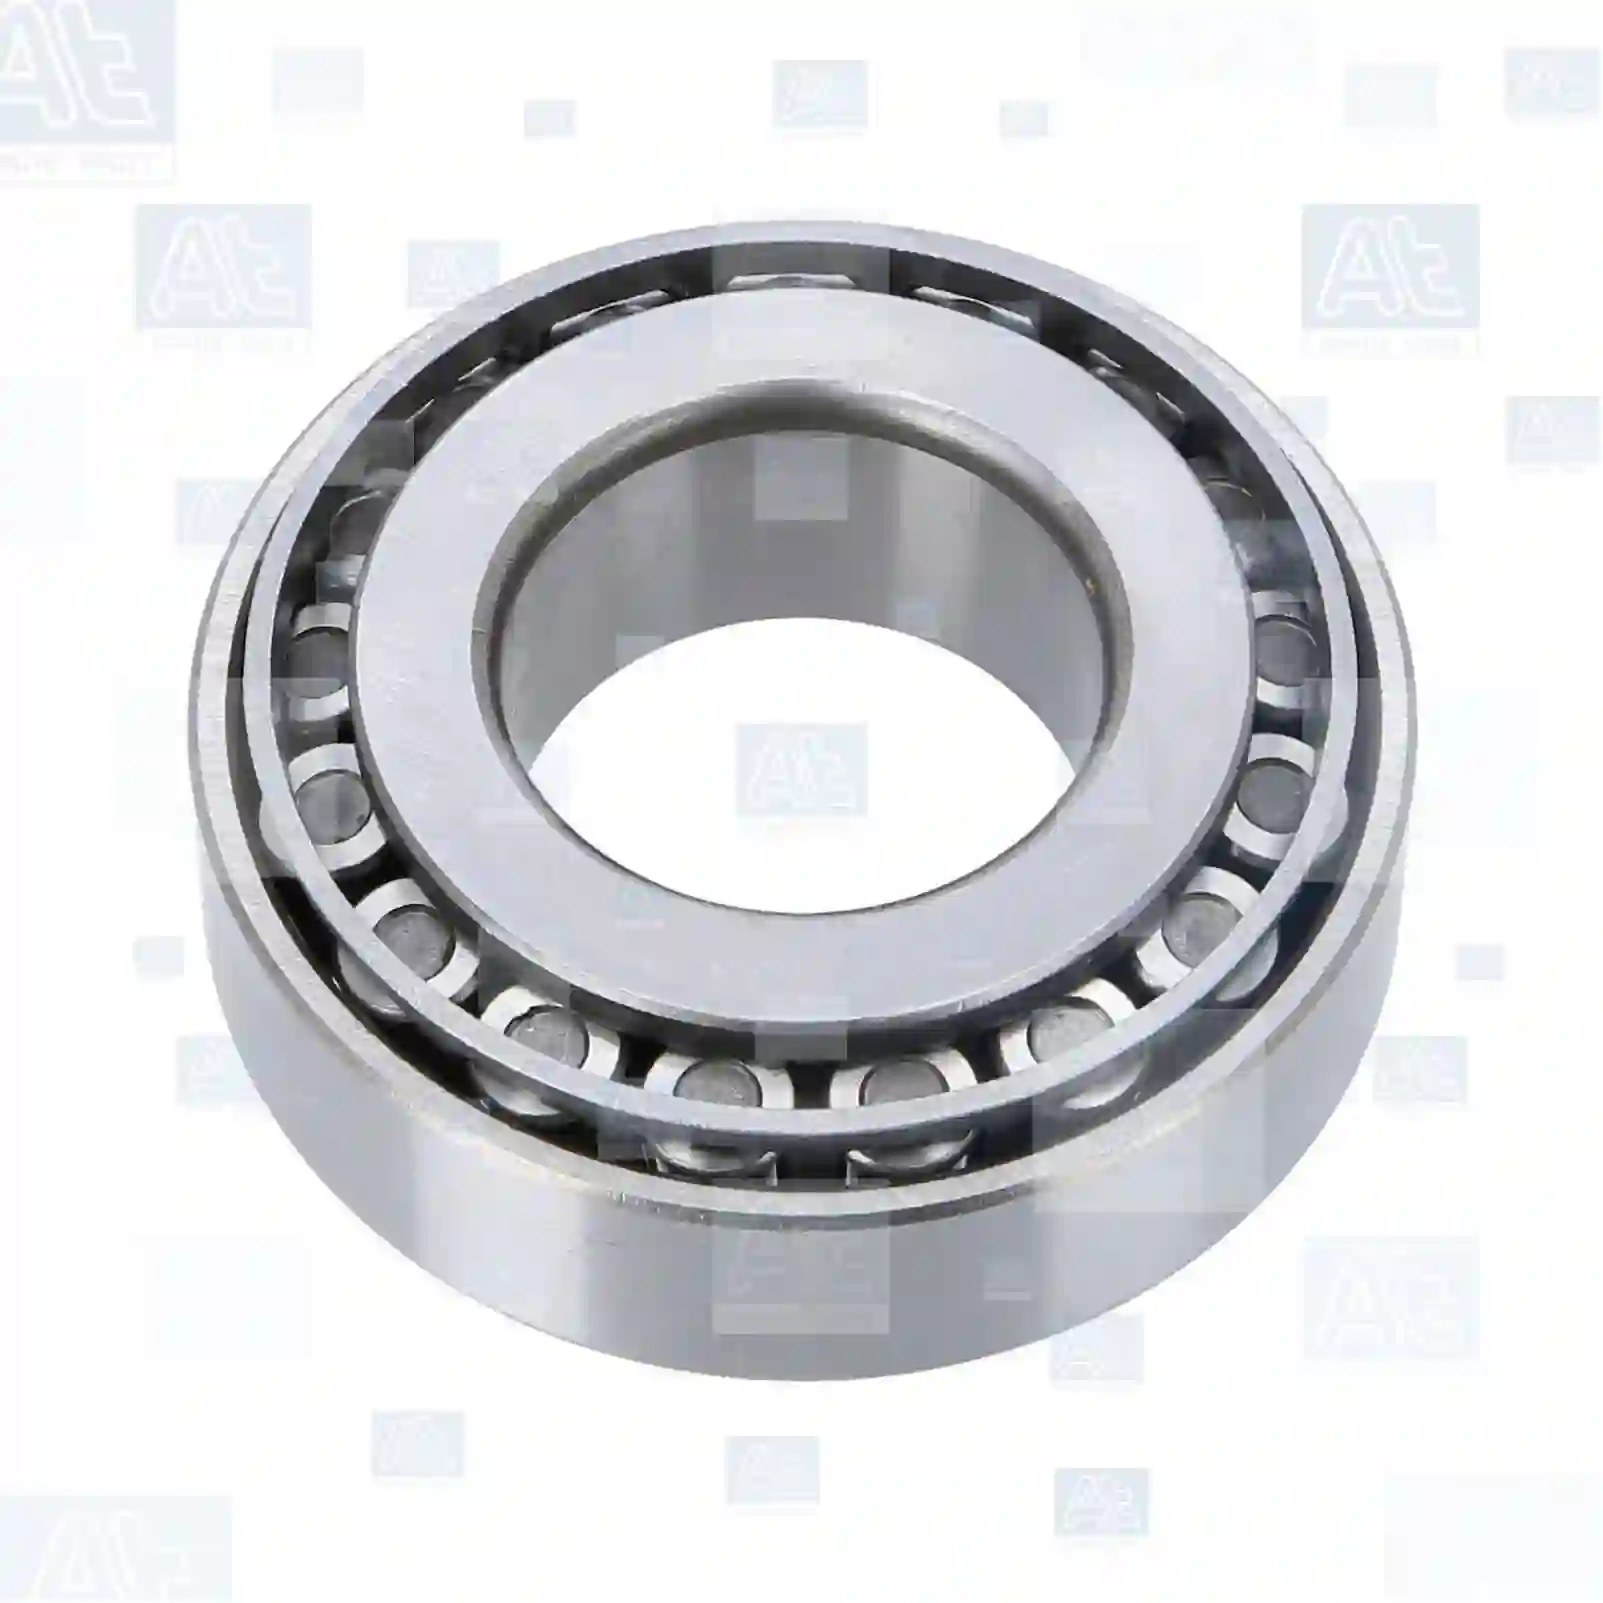 Tapered roller bearing, 77724607, 0264053500, MA111370, MB025345, MB035007, MB393956, 15919, 005092244, 1440637X1, TK004209923, TK4209923, 12337579, 94032099, 94248083, 988435105, 988435105A, 988435109, 988435109A, SZ36635005, 91007-P5D-007, 91007-PY4-003, 53232-11000, 8-12337579-0, 8-94248083-0, 8-94248083-1, 9-00093172-0, 26800130, 00221-27210, 06324990068, 06324990079, 81934200064, 87523300200, A0773220700, 022127141, 0221271410, 022127210, 055933075, 075527141, 000720032207, 0089817405, 0089817605, 2506263031, 250626303101, 3199810005, MA111370, MB0025345, MB025345, MB035007, MB393956, 32219-9X501, 40210-F3900, 0023432207, 0959232207, 0959532207, 5000388284, 5000388401, 5010241918, 5516010573, 7701465647, 7703090093, 202635, 183684, 19577, ZG02971-0008 ||  77724607 At Spare Part | Engine, Accelerator Pedal, Camshaft, Connecting Rod, Crankcase, Crankshaft, Cylinder Head, Engine Suspension Mountings, Exhaust Manifold, Exhaust Gas Recirculation, Filter Kits, Flywheel Housing, General Overhaul Kits, Engine, Intake Manifold, Oil Cleaner, Oil Cooler, Oil Filter, Oil Pump, Oil Sump, Piston & Liner, Sensor & Switch, Timing Case, Turbocharger, Cooling System, Belt Tensioner, Coolant Filter, Coolant Pipe, Corrosion Prevention Agent, Drive, Expansion Tank, Fan, Intercooler, Monitors & Gauges, Radiator, Thermostat, V-Belt / Timing belt, Water Pump, Fuel System, Electronical Injector Unit, Feed Pump, Fuel Filter, cpl., Fuel Gauge Sender,  Fuel Line, Fuel Pump, Fuel Tank, Injection Line Kit, Injection Pump, Exhaust System, Clutch & Pedal, Gearbox, Propeller Shaft, Axles, Brake System, Hubs & Wheels, Suspension, Leaf Spring, Universal Parts / Accessories, Steering, Electrical System, Cabin Tapered roller bearing, 77724607, 0264053500, MA111370, MB025345, MB035007, MB393956, 15919, 005092244, 1440637X1, TK004209923, TK4209923, 12337579, 94032099, 94248083, 988435105, 988435105A, 988435109, 988435109A, SZ36635005, 91007-P5D-007, 91007-PY4-003, 53232-11000, 8-12337579-0, 8-94248083-0, 8-94248083-1, 9-00093172-0, 26800130, 00221-27210, 06324990068, 06324990079, 81934200064, 87523300200, A0773220700, 022127141, 0221271410, 022127210, 055933075, 075527141, 000720032207, 0089817405, 0089817605, 2506263031, 250626303101, 3199810005, MA111370, MB0025345, MB025345, MB035007, MB393956, 32219-9X501, 40210-F3900, 0023432207, 0959232207, 0959532207, 5000388284, 5000388401, 5010241918, 5516010573, 7701465647, 7703090093, 202635, 183684, 19577, ZG02971-0008 ||  77724607 At Spare Part | Engine, Accelerator Pedal, Camshaft, Connecting Rod, Crankcase, Crankshaft, Cylinder Head, Engine Suspension Mountings, Exhaust Manifold, Exhaust Gas Recirculation, Filter Kits, Flywheel Housing, General Overhaul Kits, Engine, Intake Manifold, Oil Cleaner, Oil Cooler, Oil Filter, Oil Pump, Oil Sump, Piston & Liner, Sensor & Switch, Timing Case, Turbocharger, Cooling System, Belt Tensioner, Coolant Filter, Coolant Pipe, Corrosion Prevention Agent, Drive, Expansion Tank, Fan, Intercooler, Monitors & Gauges, Radiator, Thermostat, V-Belt / Timing belt, Water Pump, Fuel System, Electronical Injector Unit, Feed Pump, Fuel Filter, cpl., Fuel Gauge Sender,  Fuel Line, Fuel Pump, Fuel Tank, Injection Line Kit, Injection Pump, Exhaust System, Clutch & Pedal, Gearbox, Propeller Shaft, Axles, Brake System, Hubs & Wheels, Suspension, Leaf Spring, Universal Parts / Accessories, Steering, Electrical System, Cabin